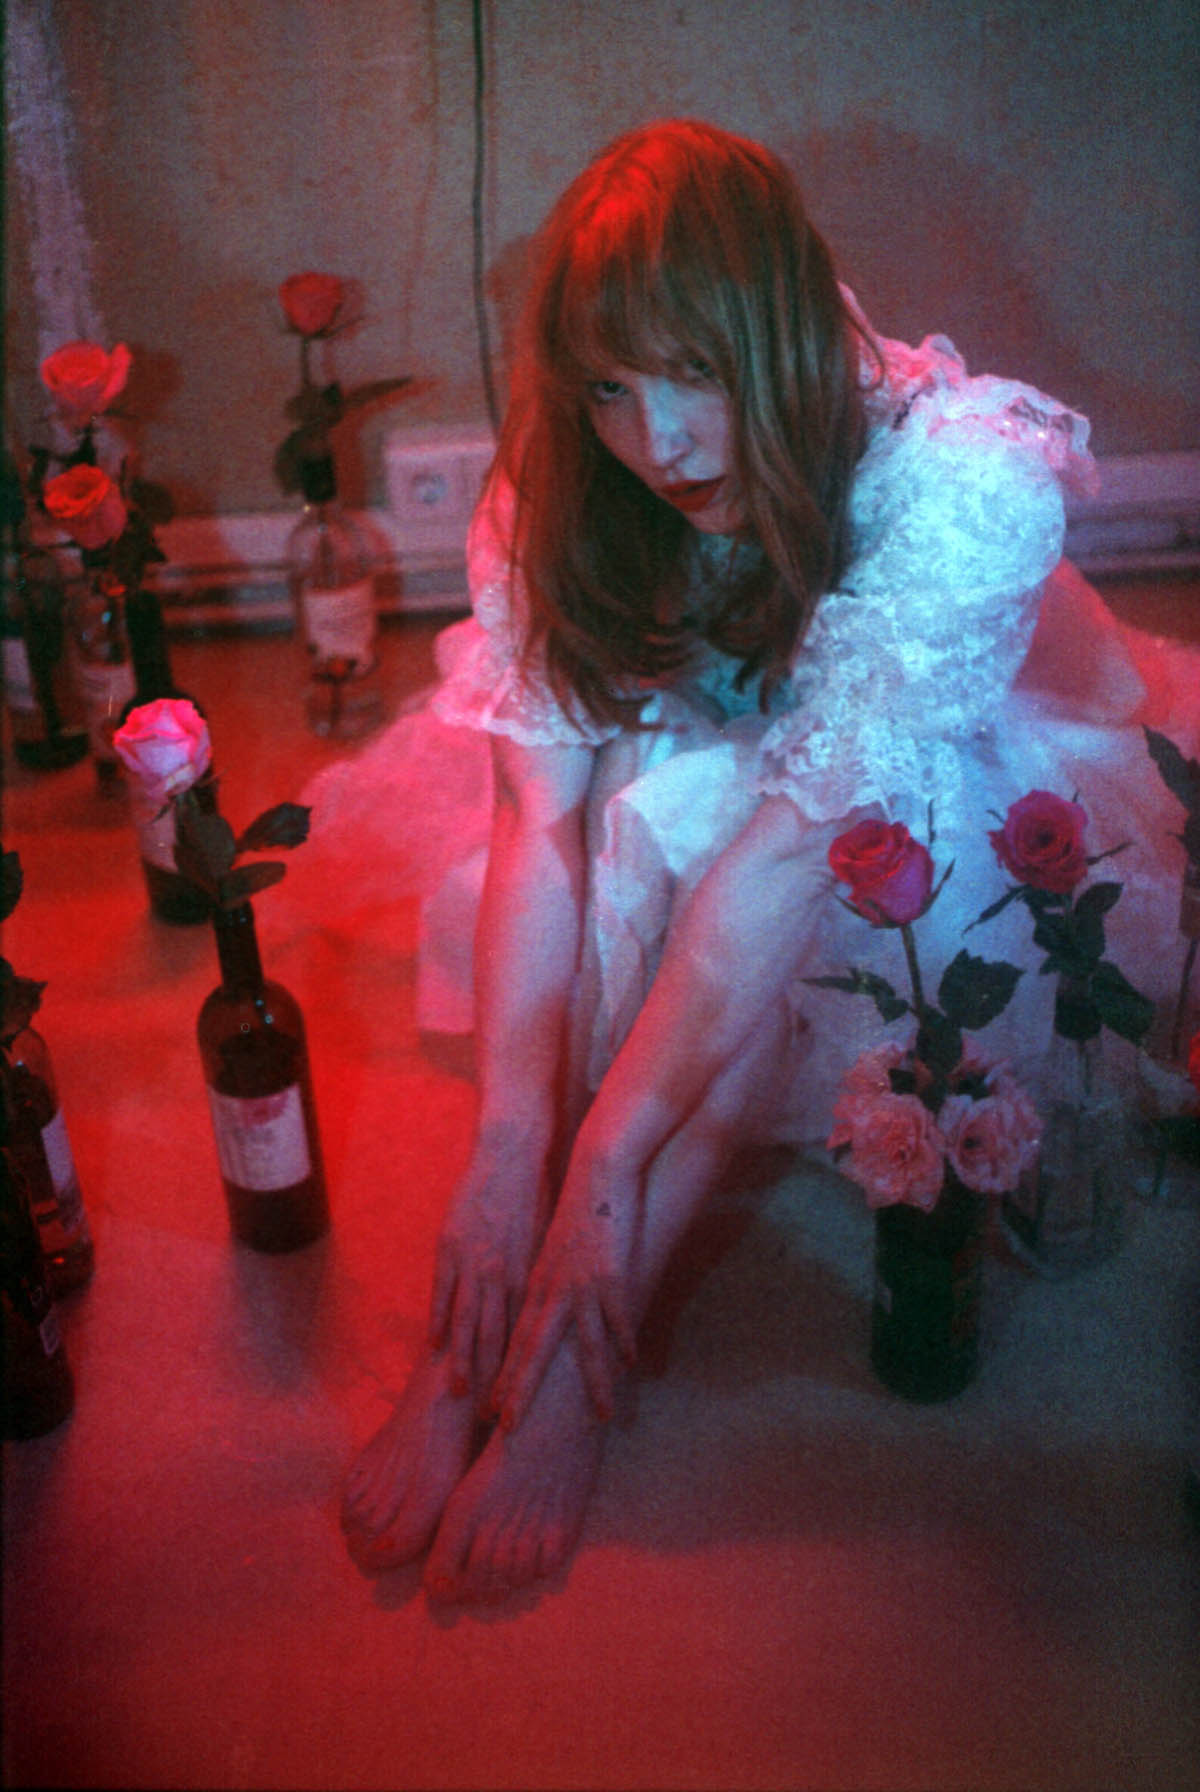 White woman with red hair and a white frilly dress sits bent forward on the floor. Her legs are bent, she touches her bare feet with her hands. She looks into the camera. Around her are single roses in several wine bottles.